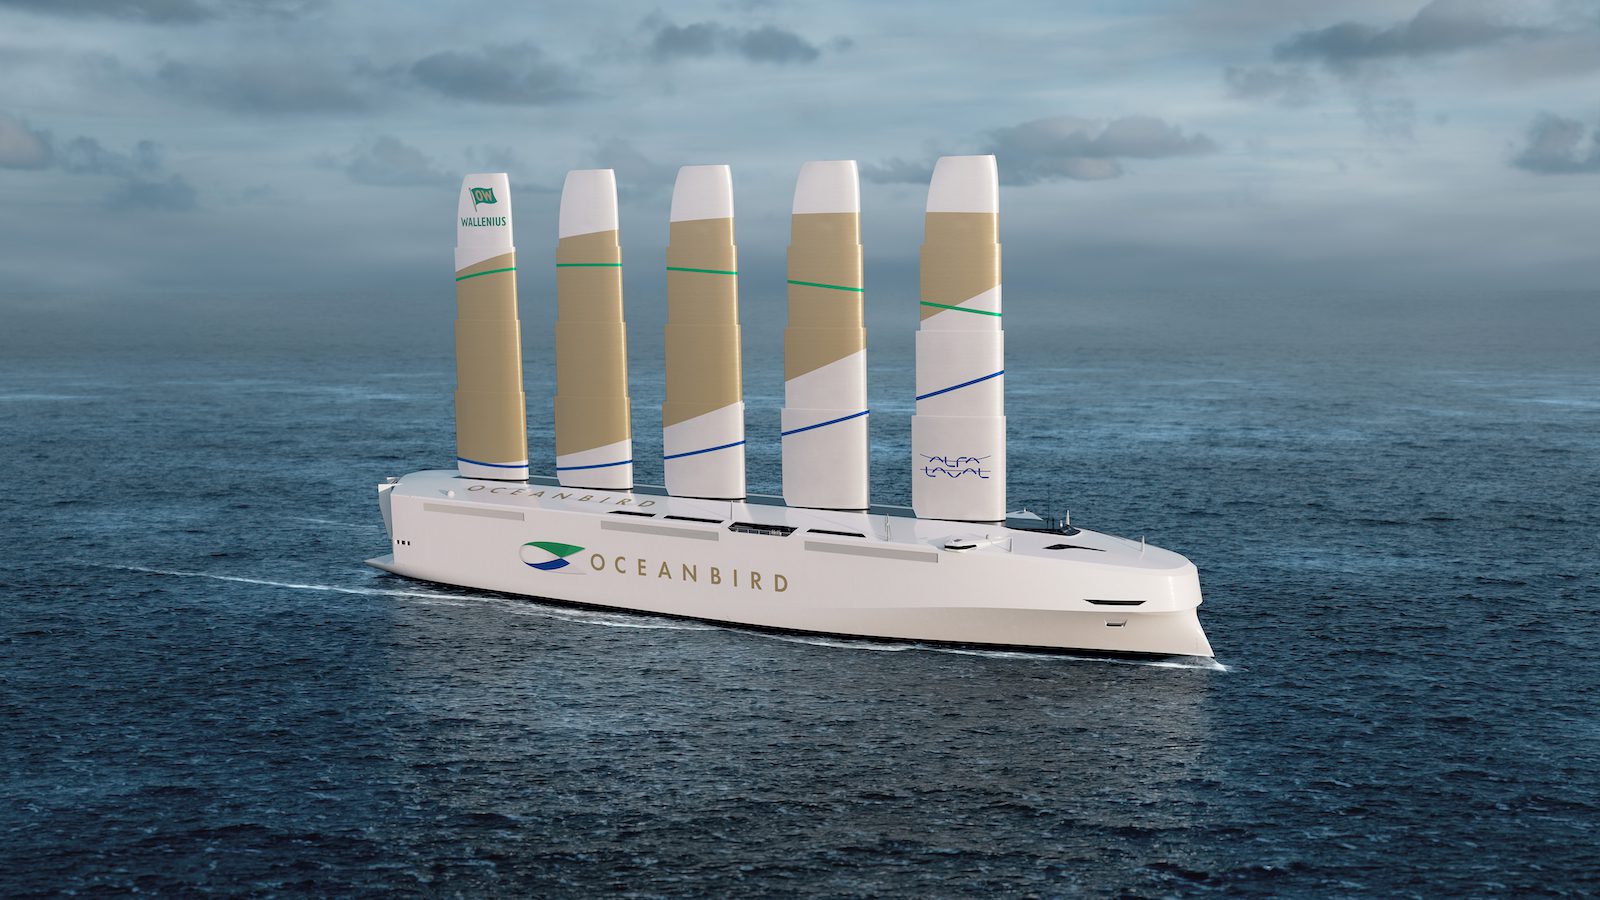 Oceanbird wind propulsion technology accelerates its way to market with JV company